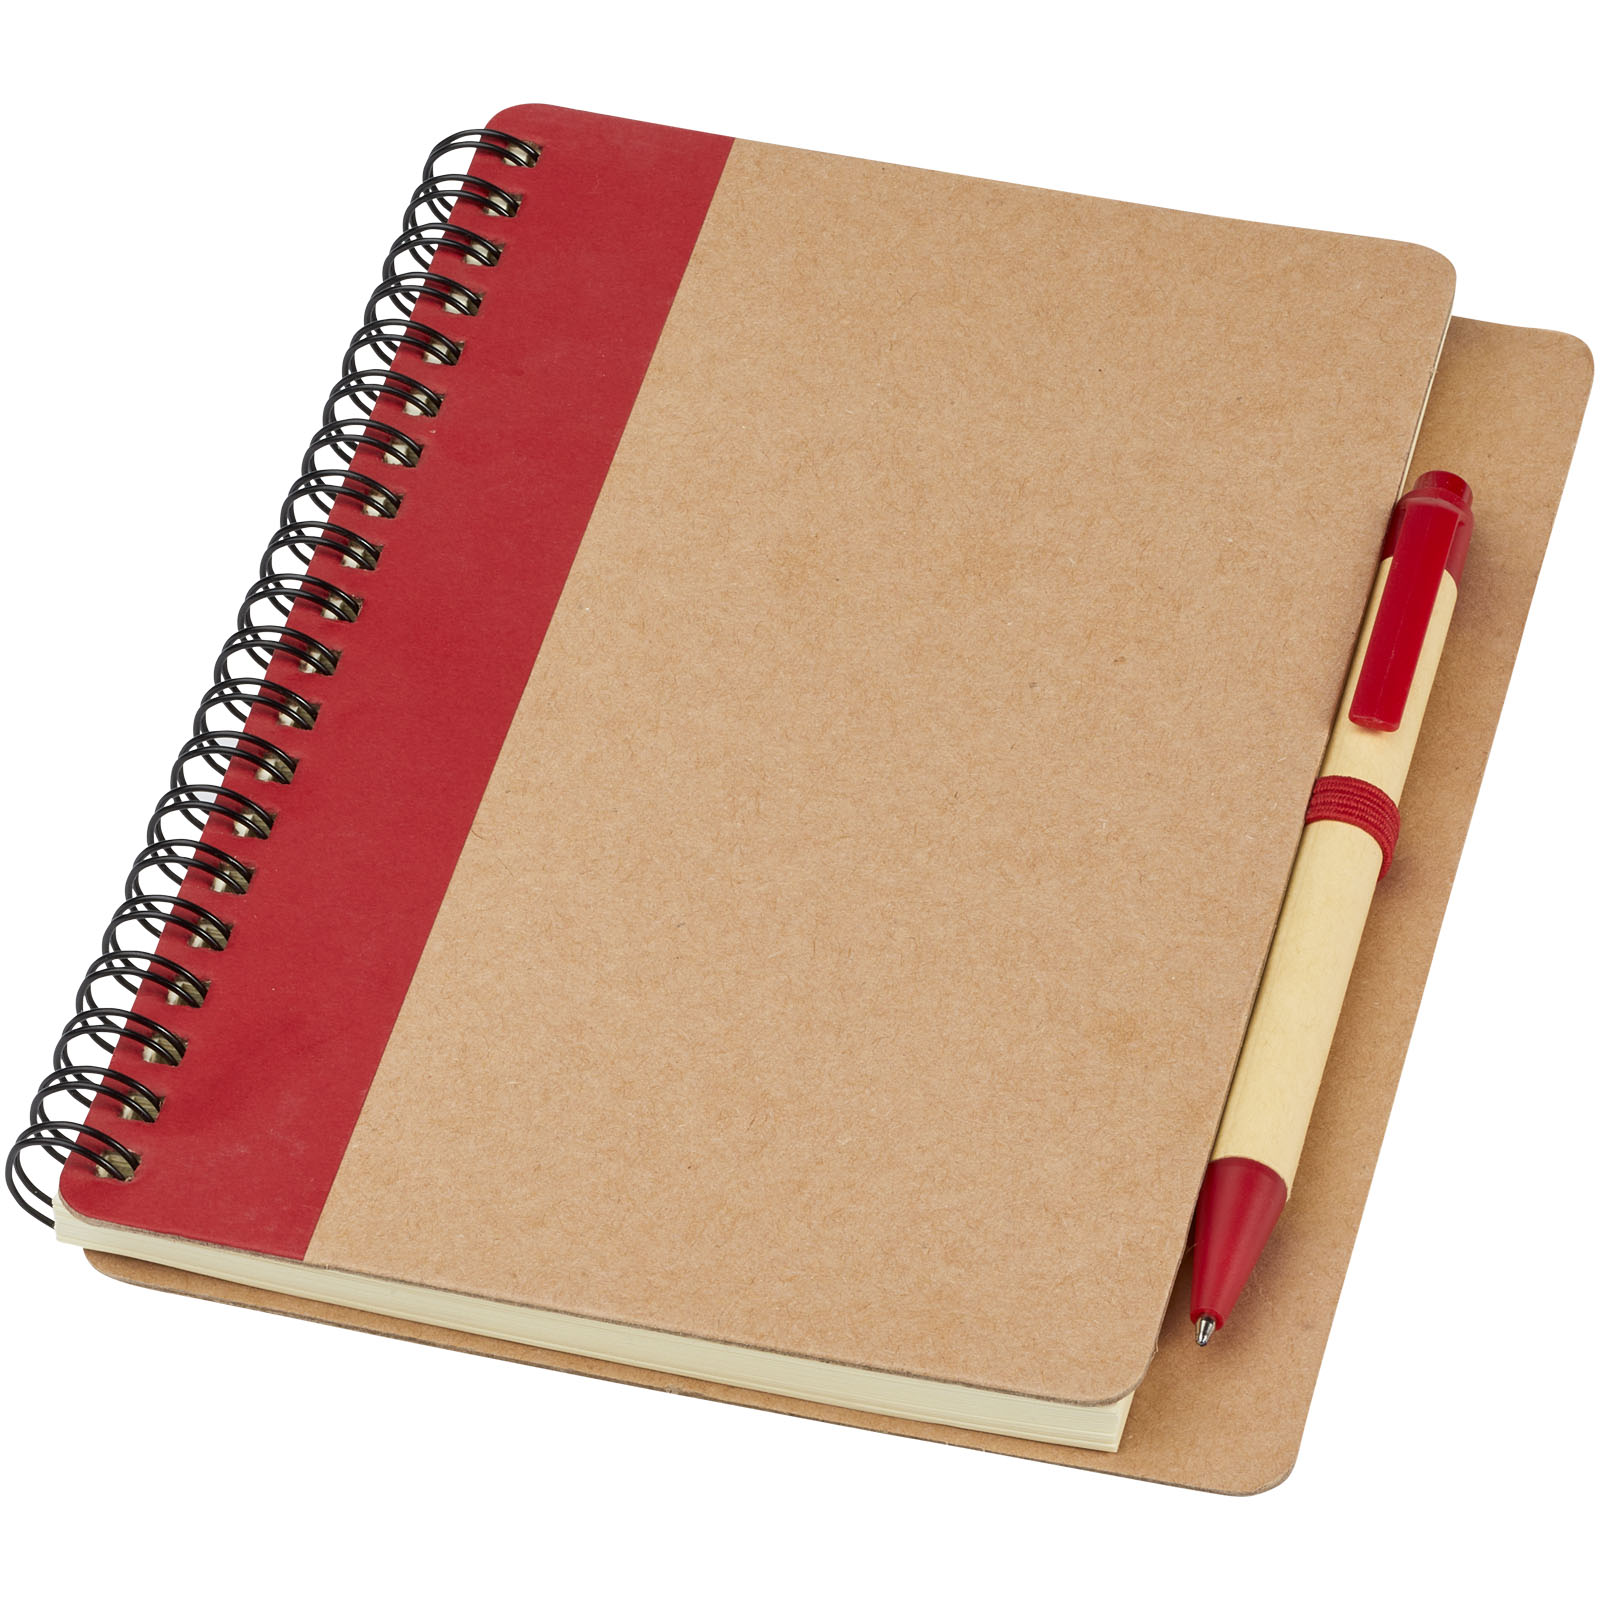 Notebooks & Desk Essentials - Priestly recycled notebook with pen